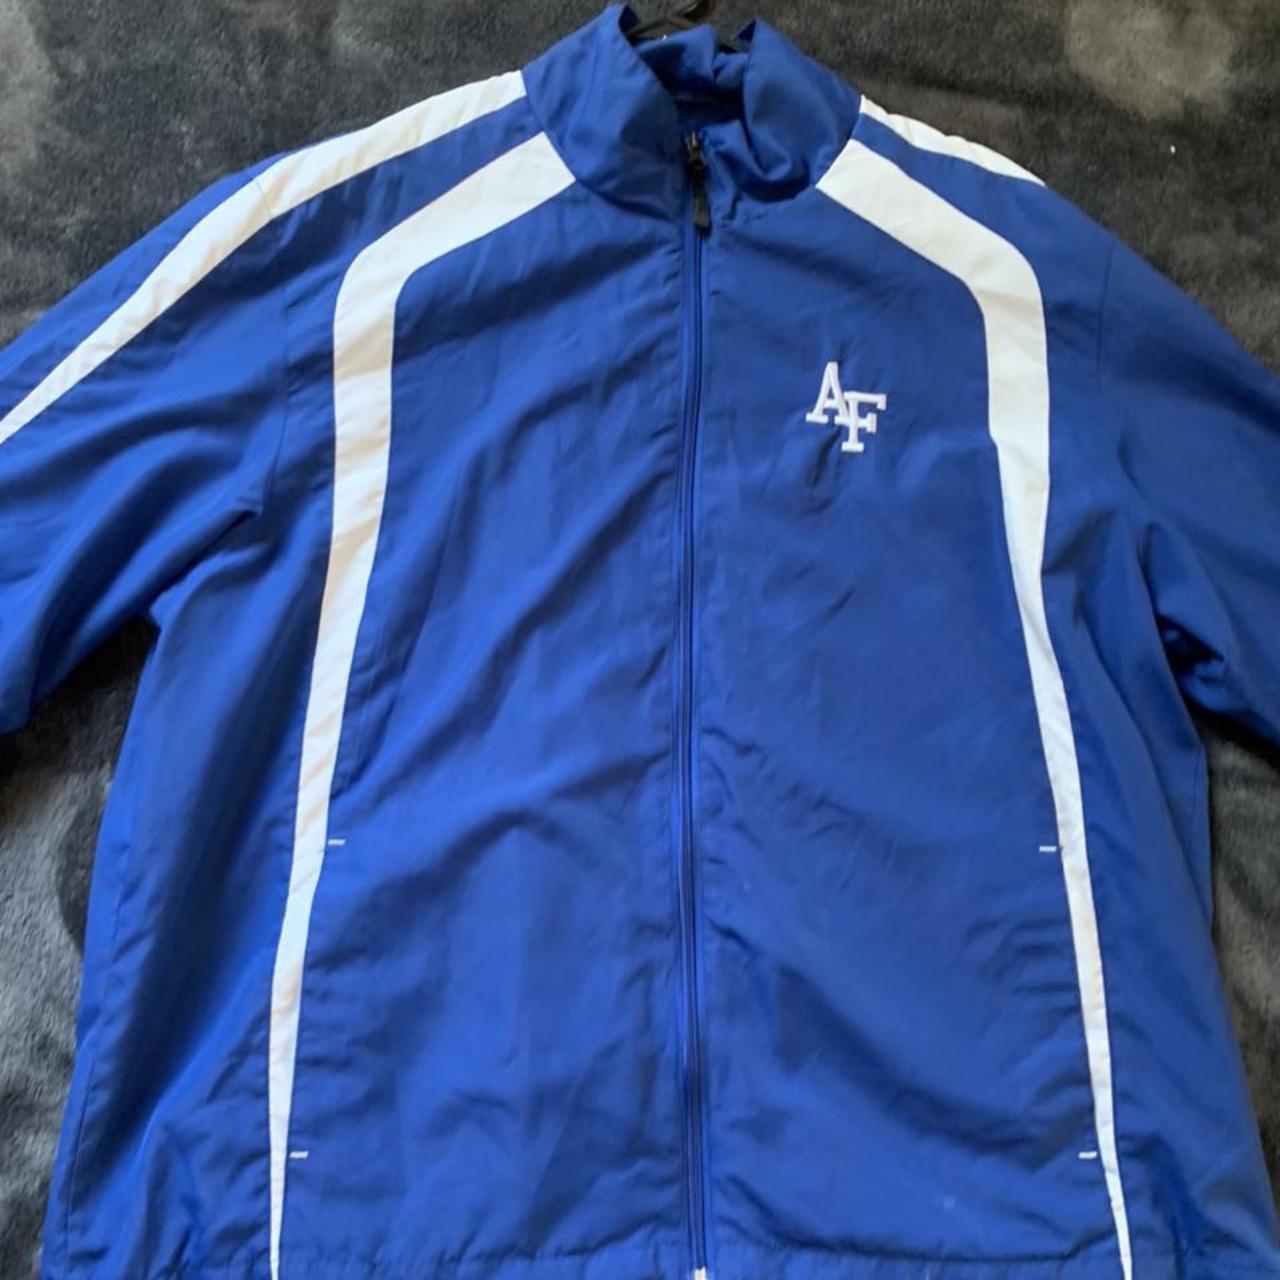 Men's Blue and White Jacket